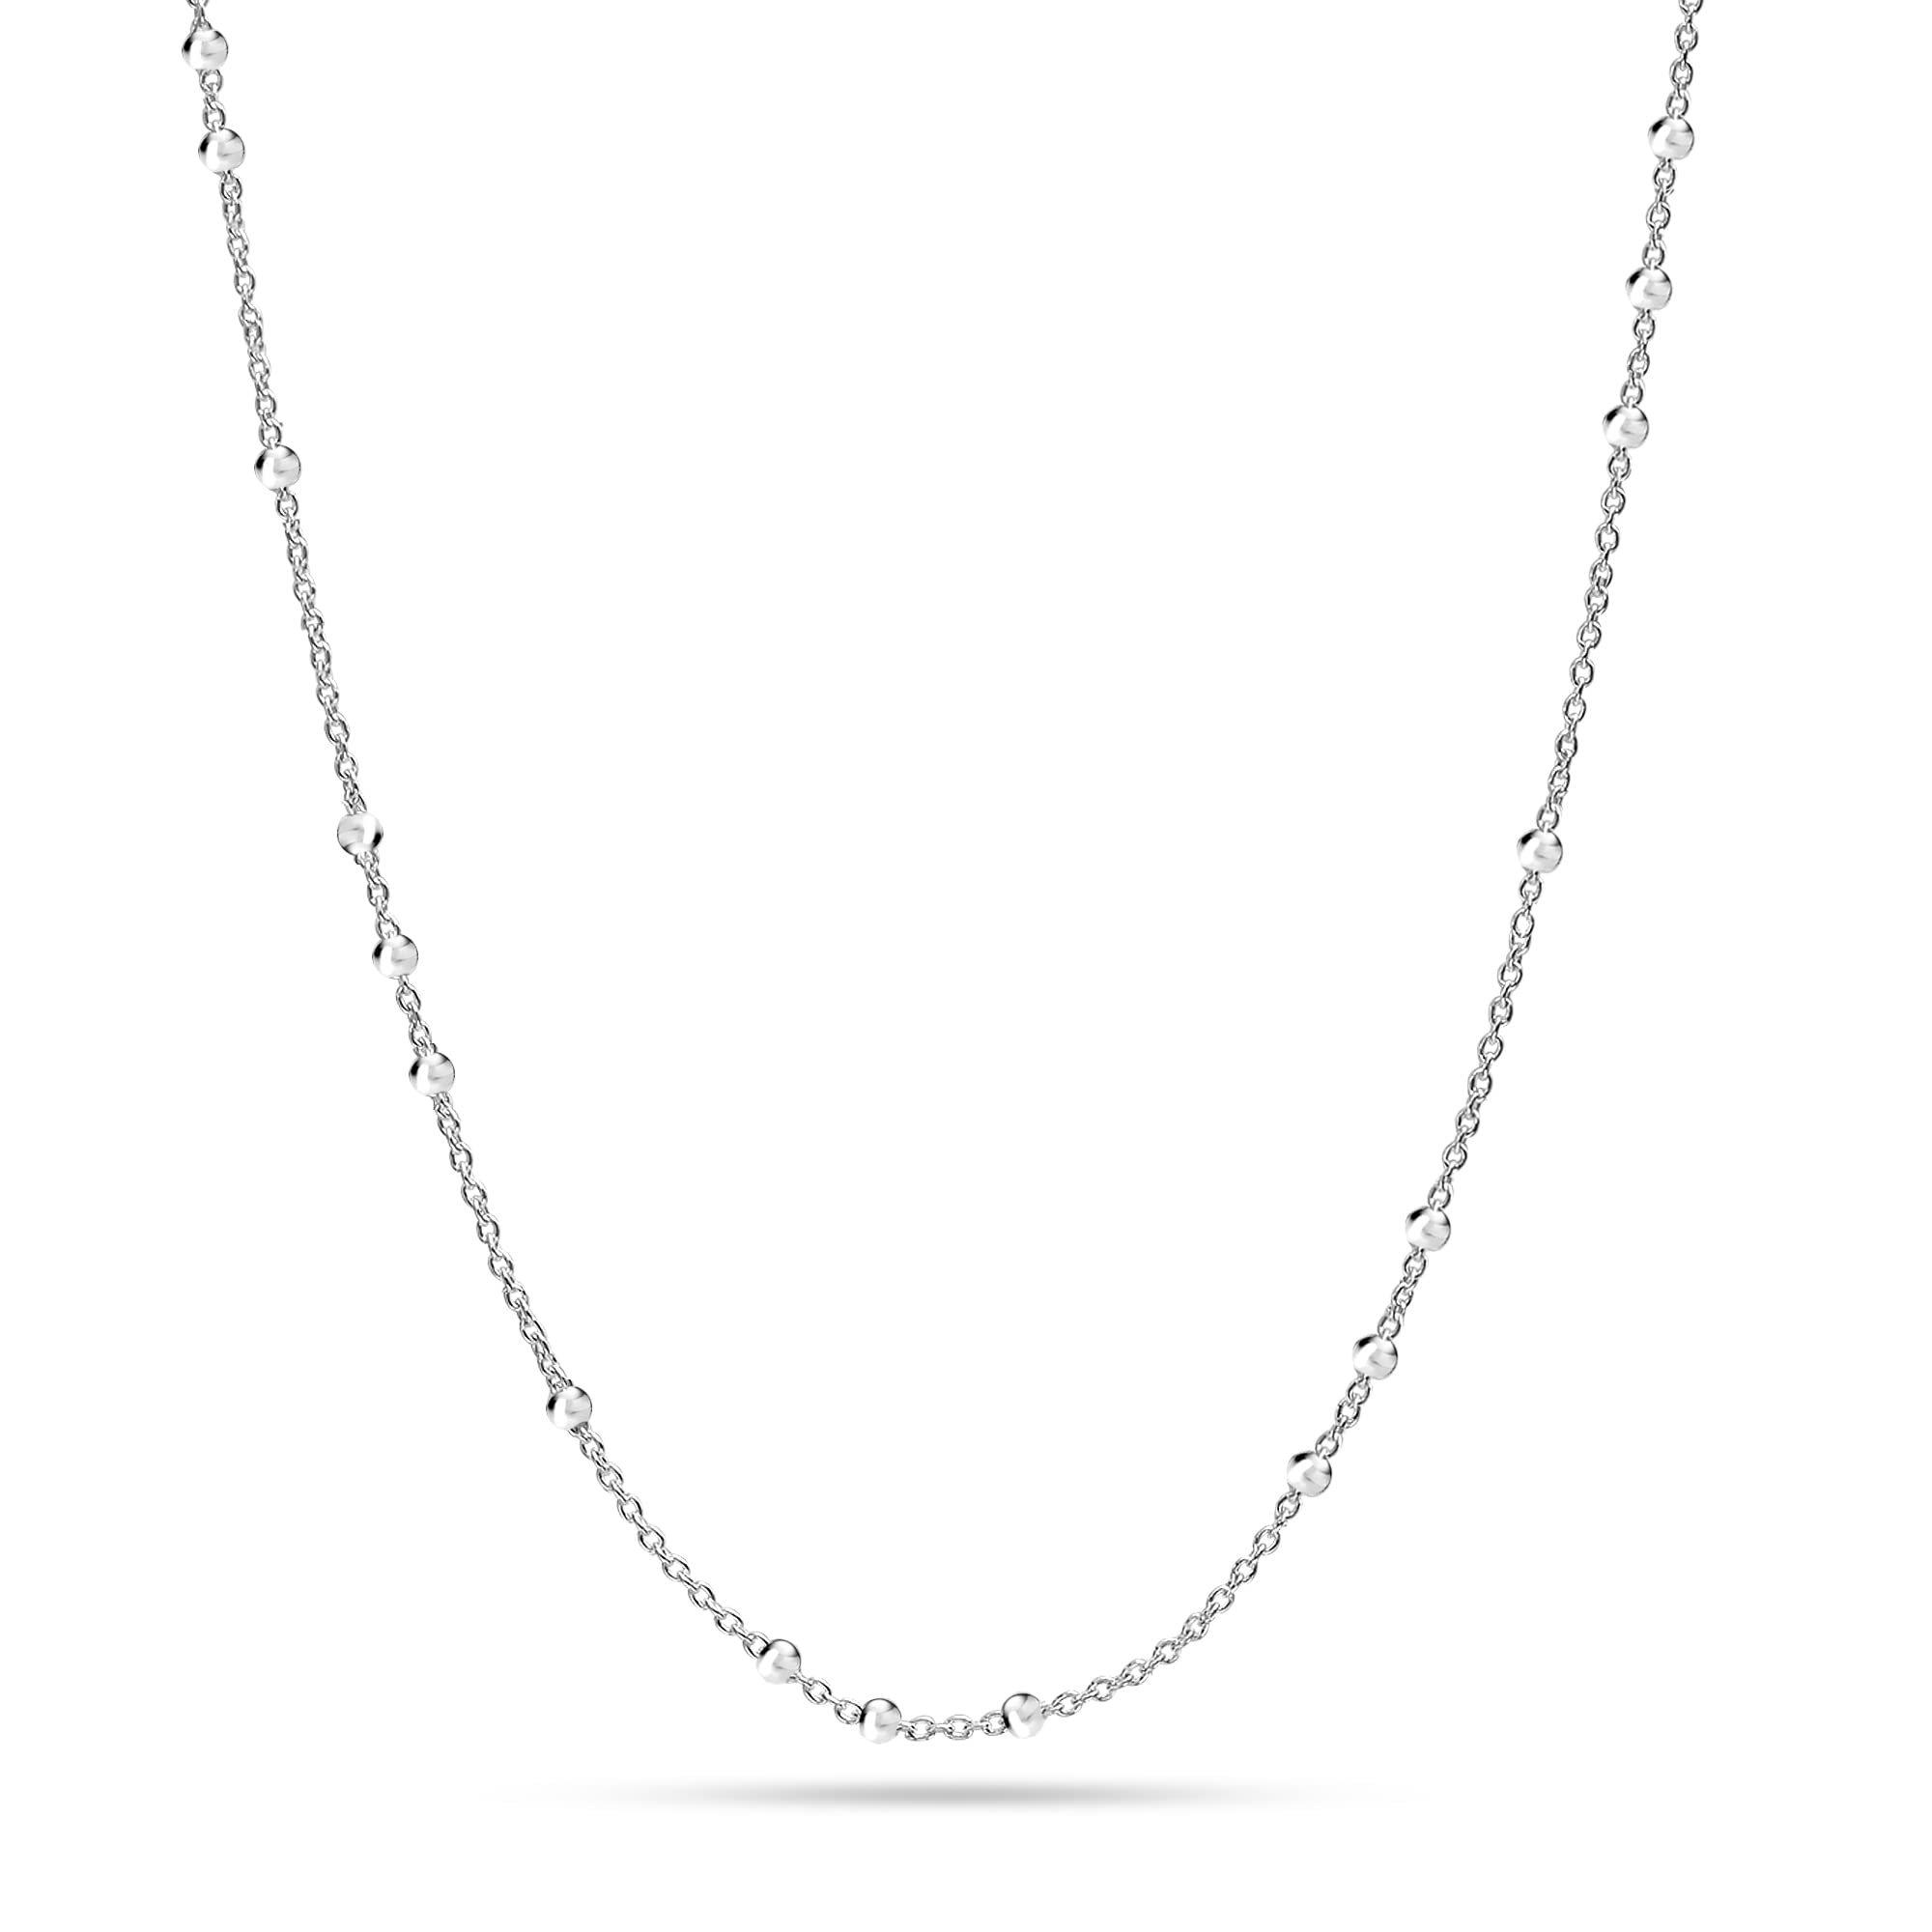 925 Sterling Silver Italian Ball Bead Station Cable Chain Necklace for Women